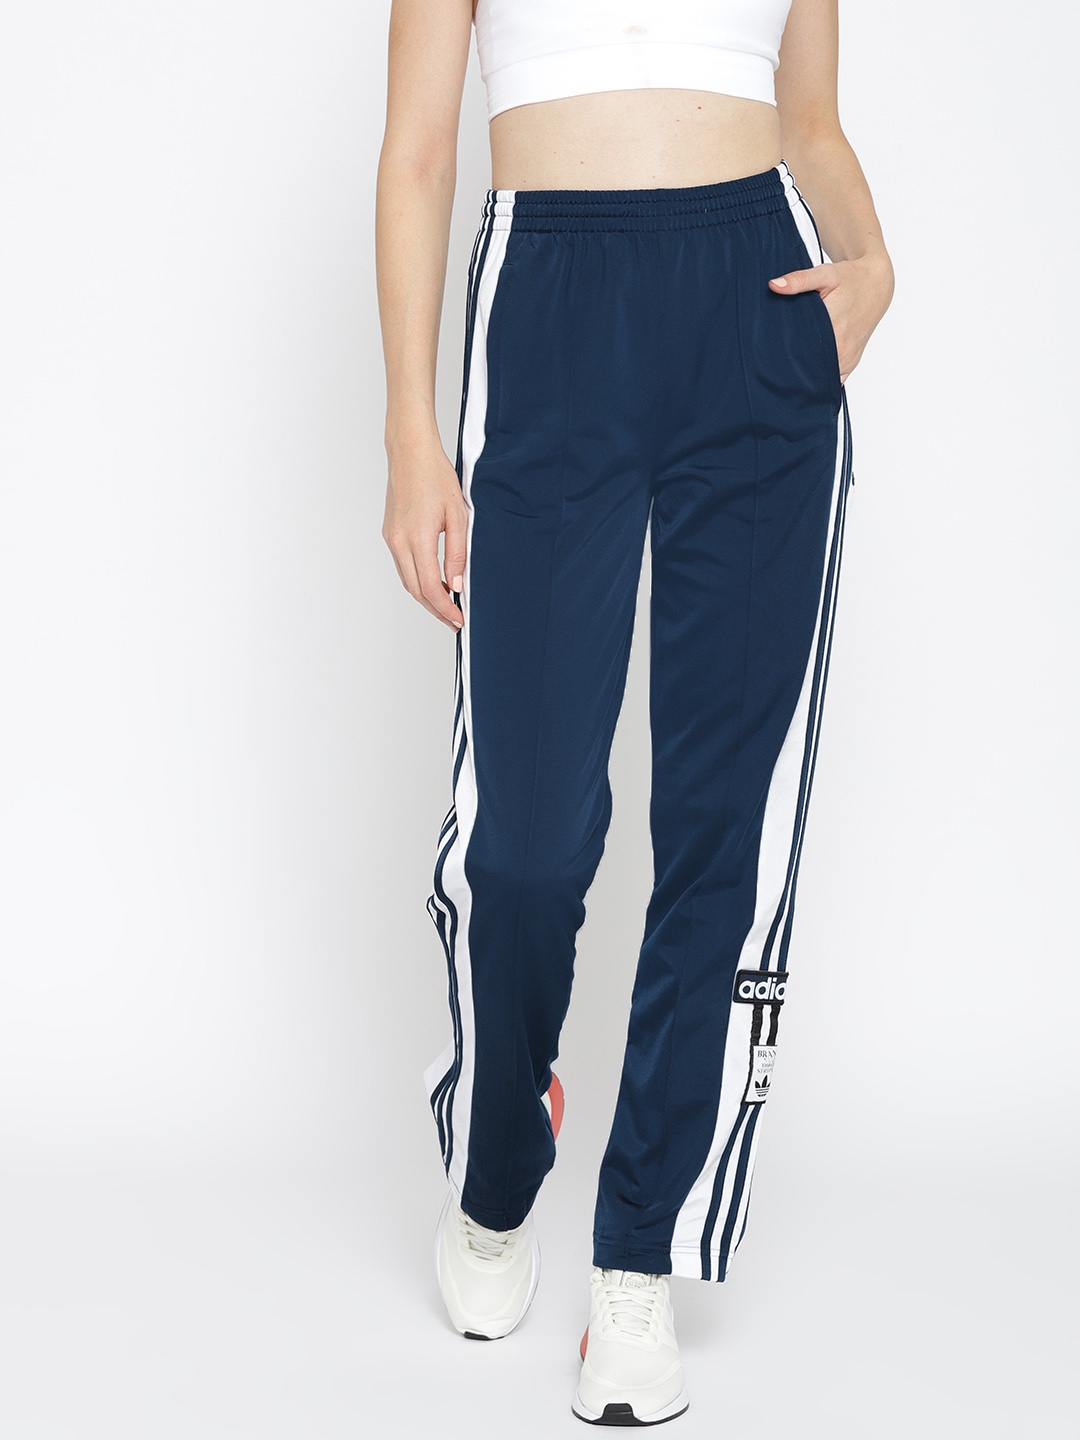 adidas originals track pants with buttons